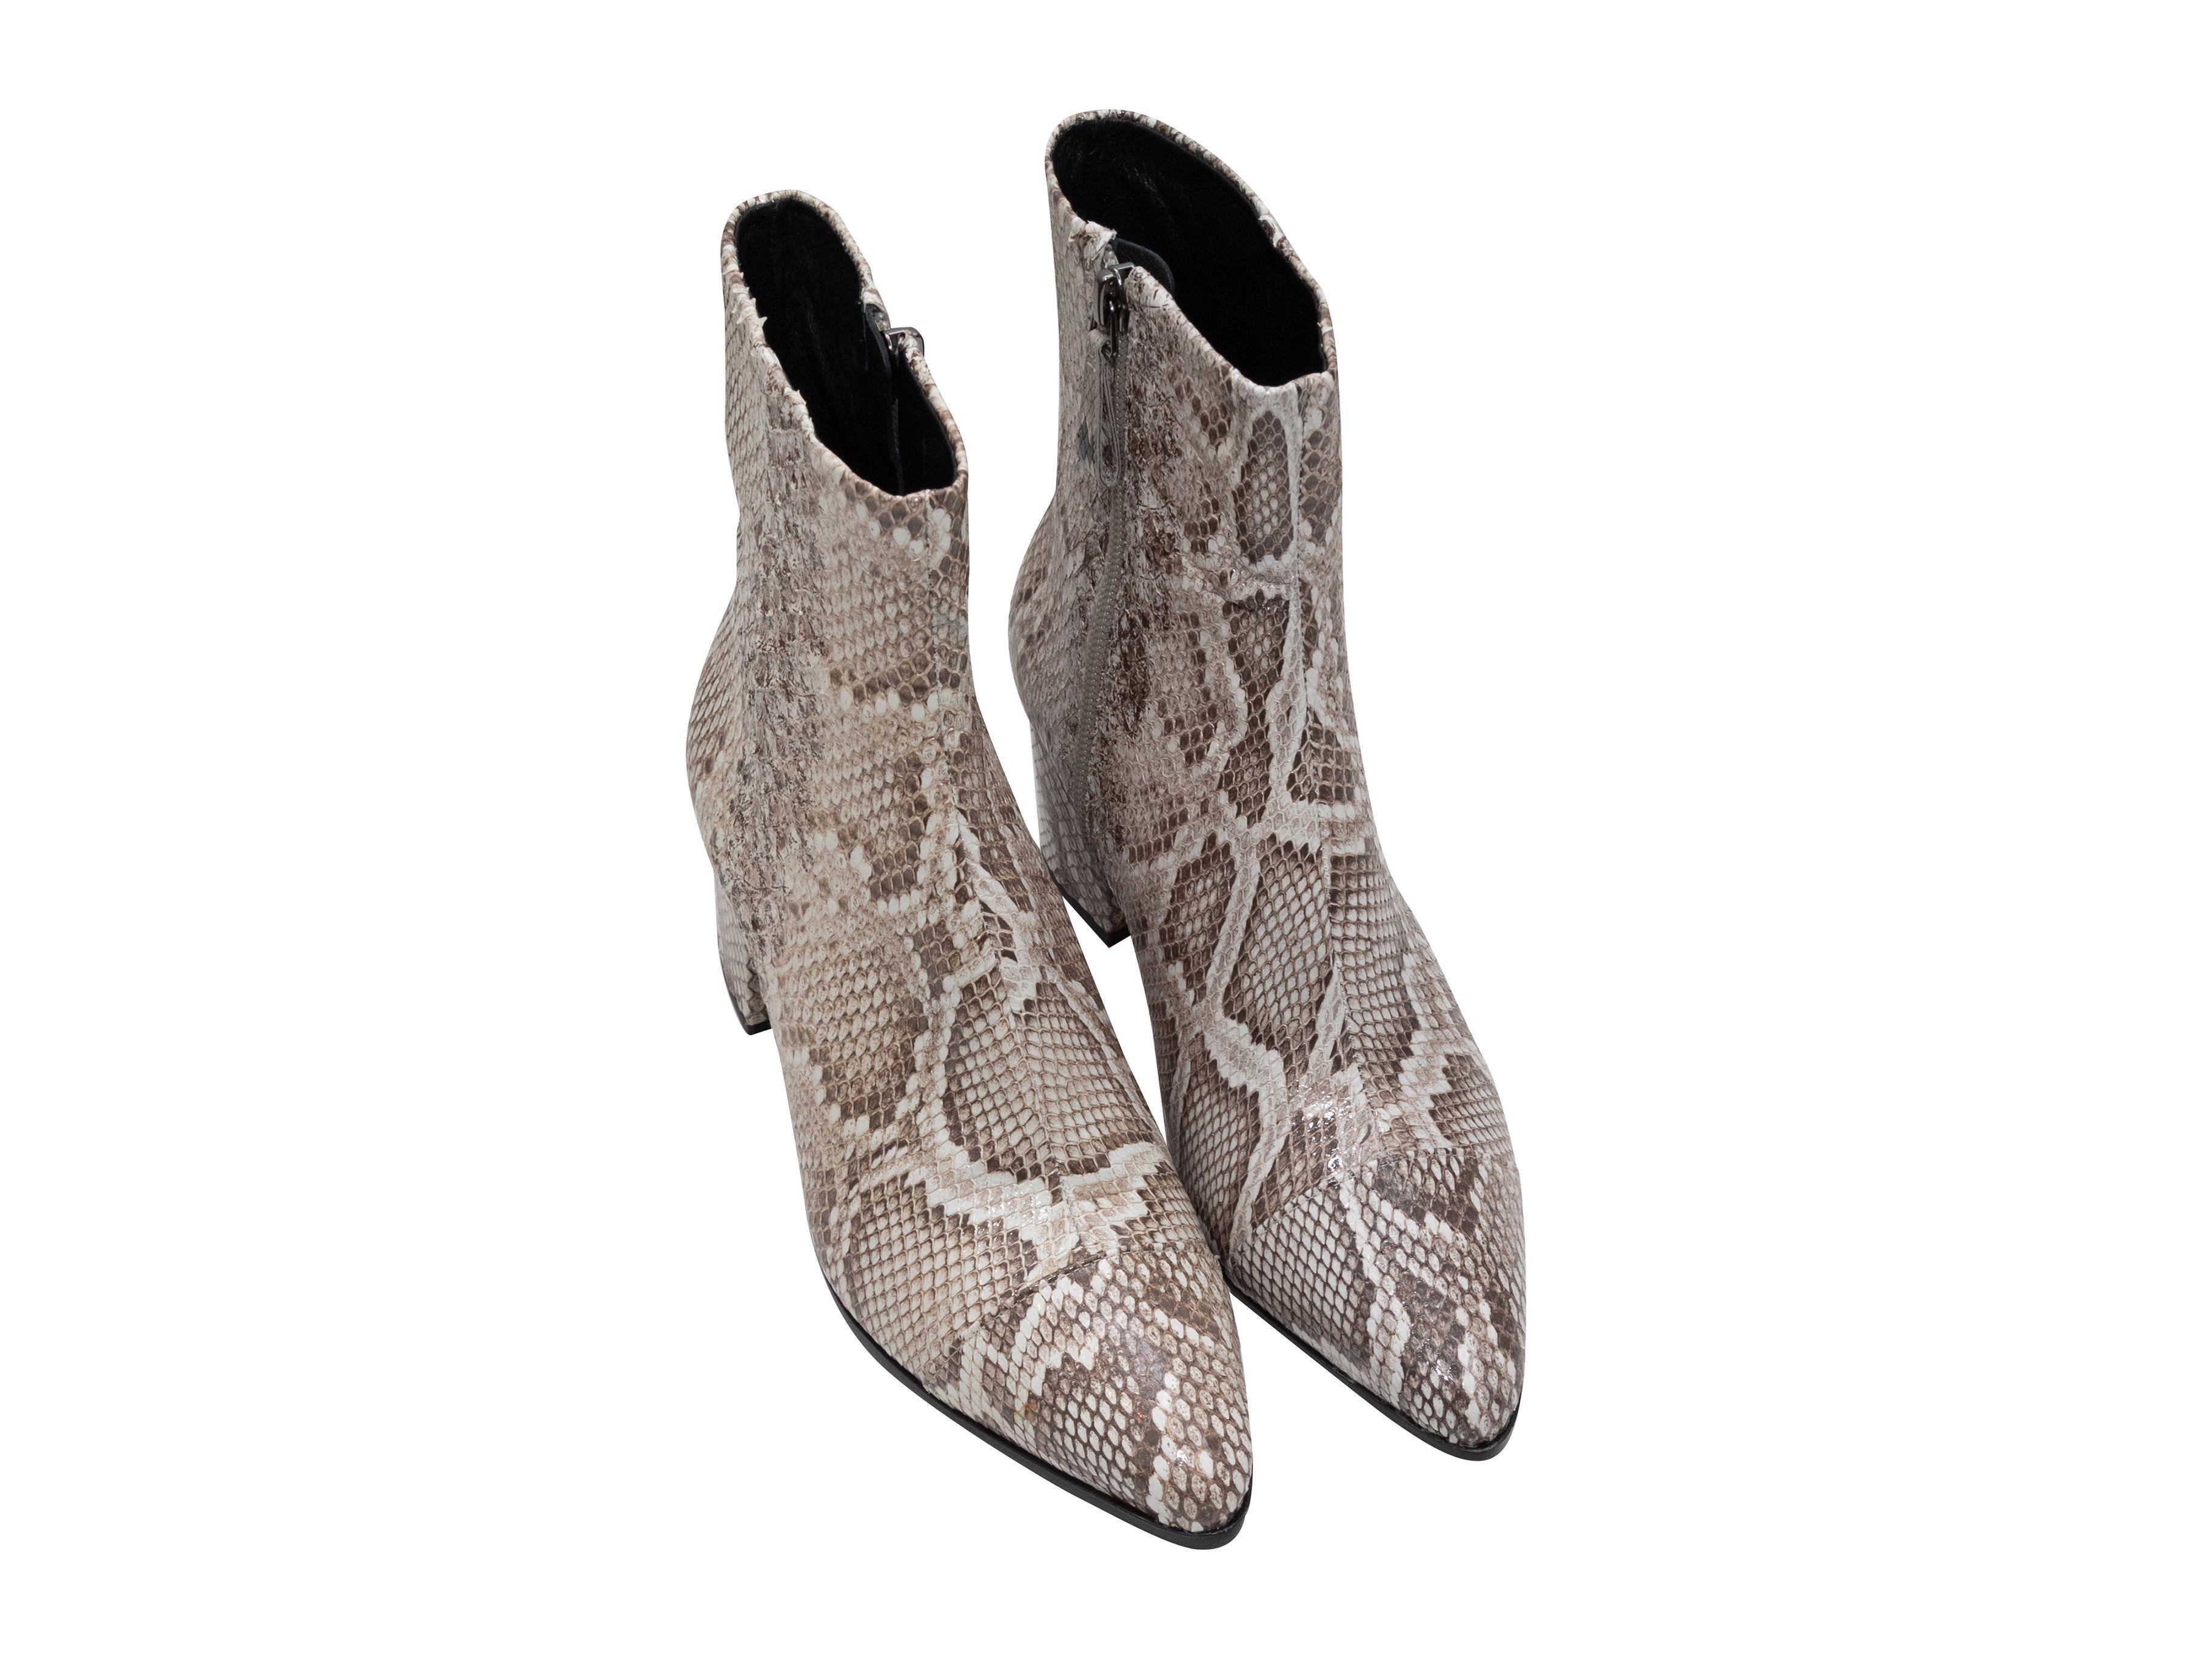 Product Details: Grey and black python pointed-toe ankle boots by Alexandre Birman. Block heels. Zip closures at inner sides. 2.5